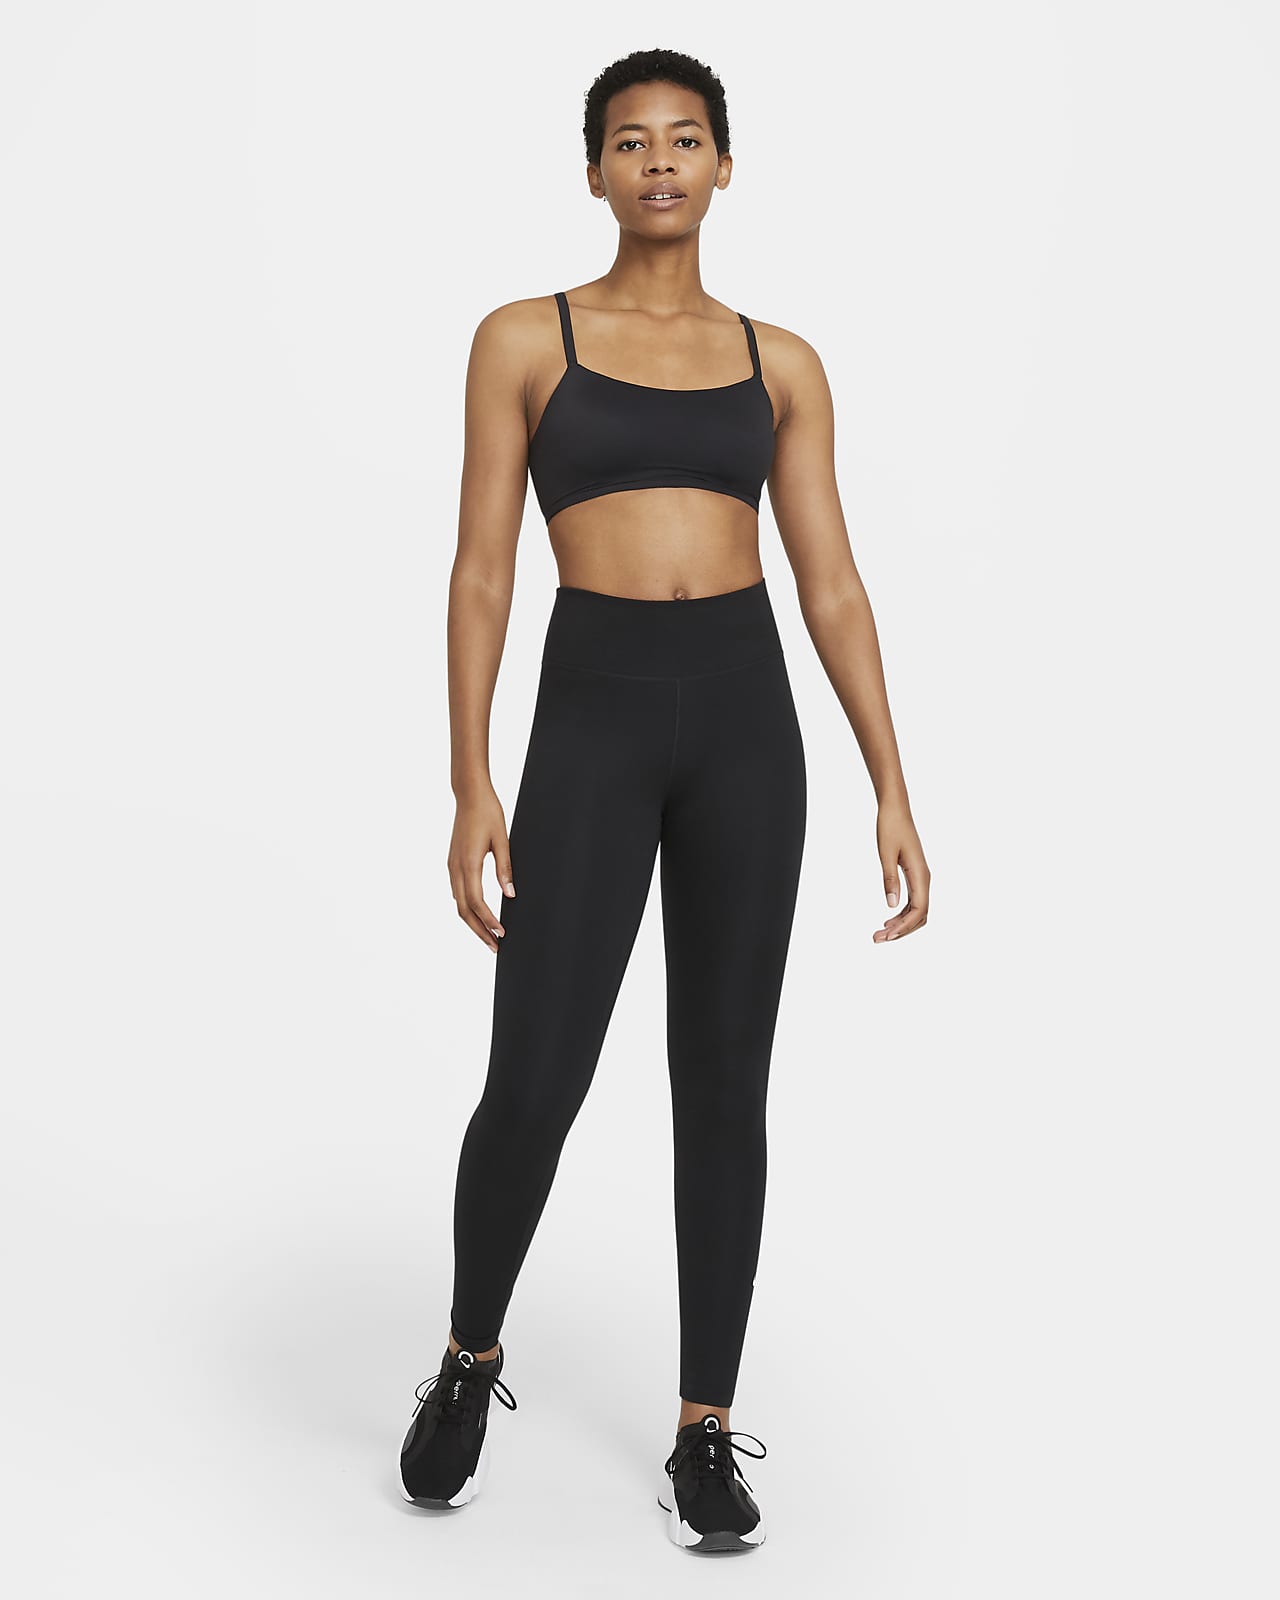 https://static.nike.com/a/images/t_PDP_1280_v1/f_auto,q_auto:eco/76e910c4-d95a-4567-b95d-9e83ac5a26fa/legging-taille-mi-basse-one-pour-6thDwZ.png